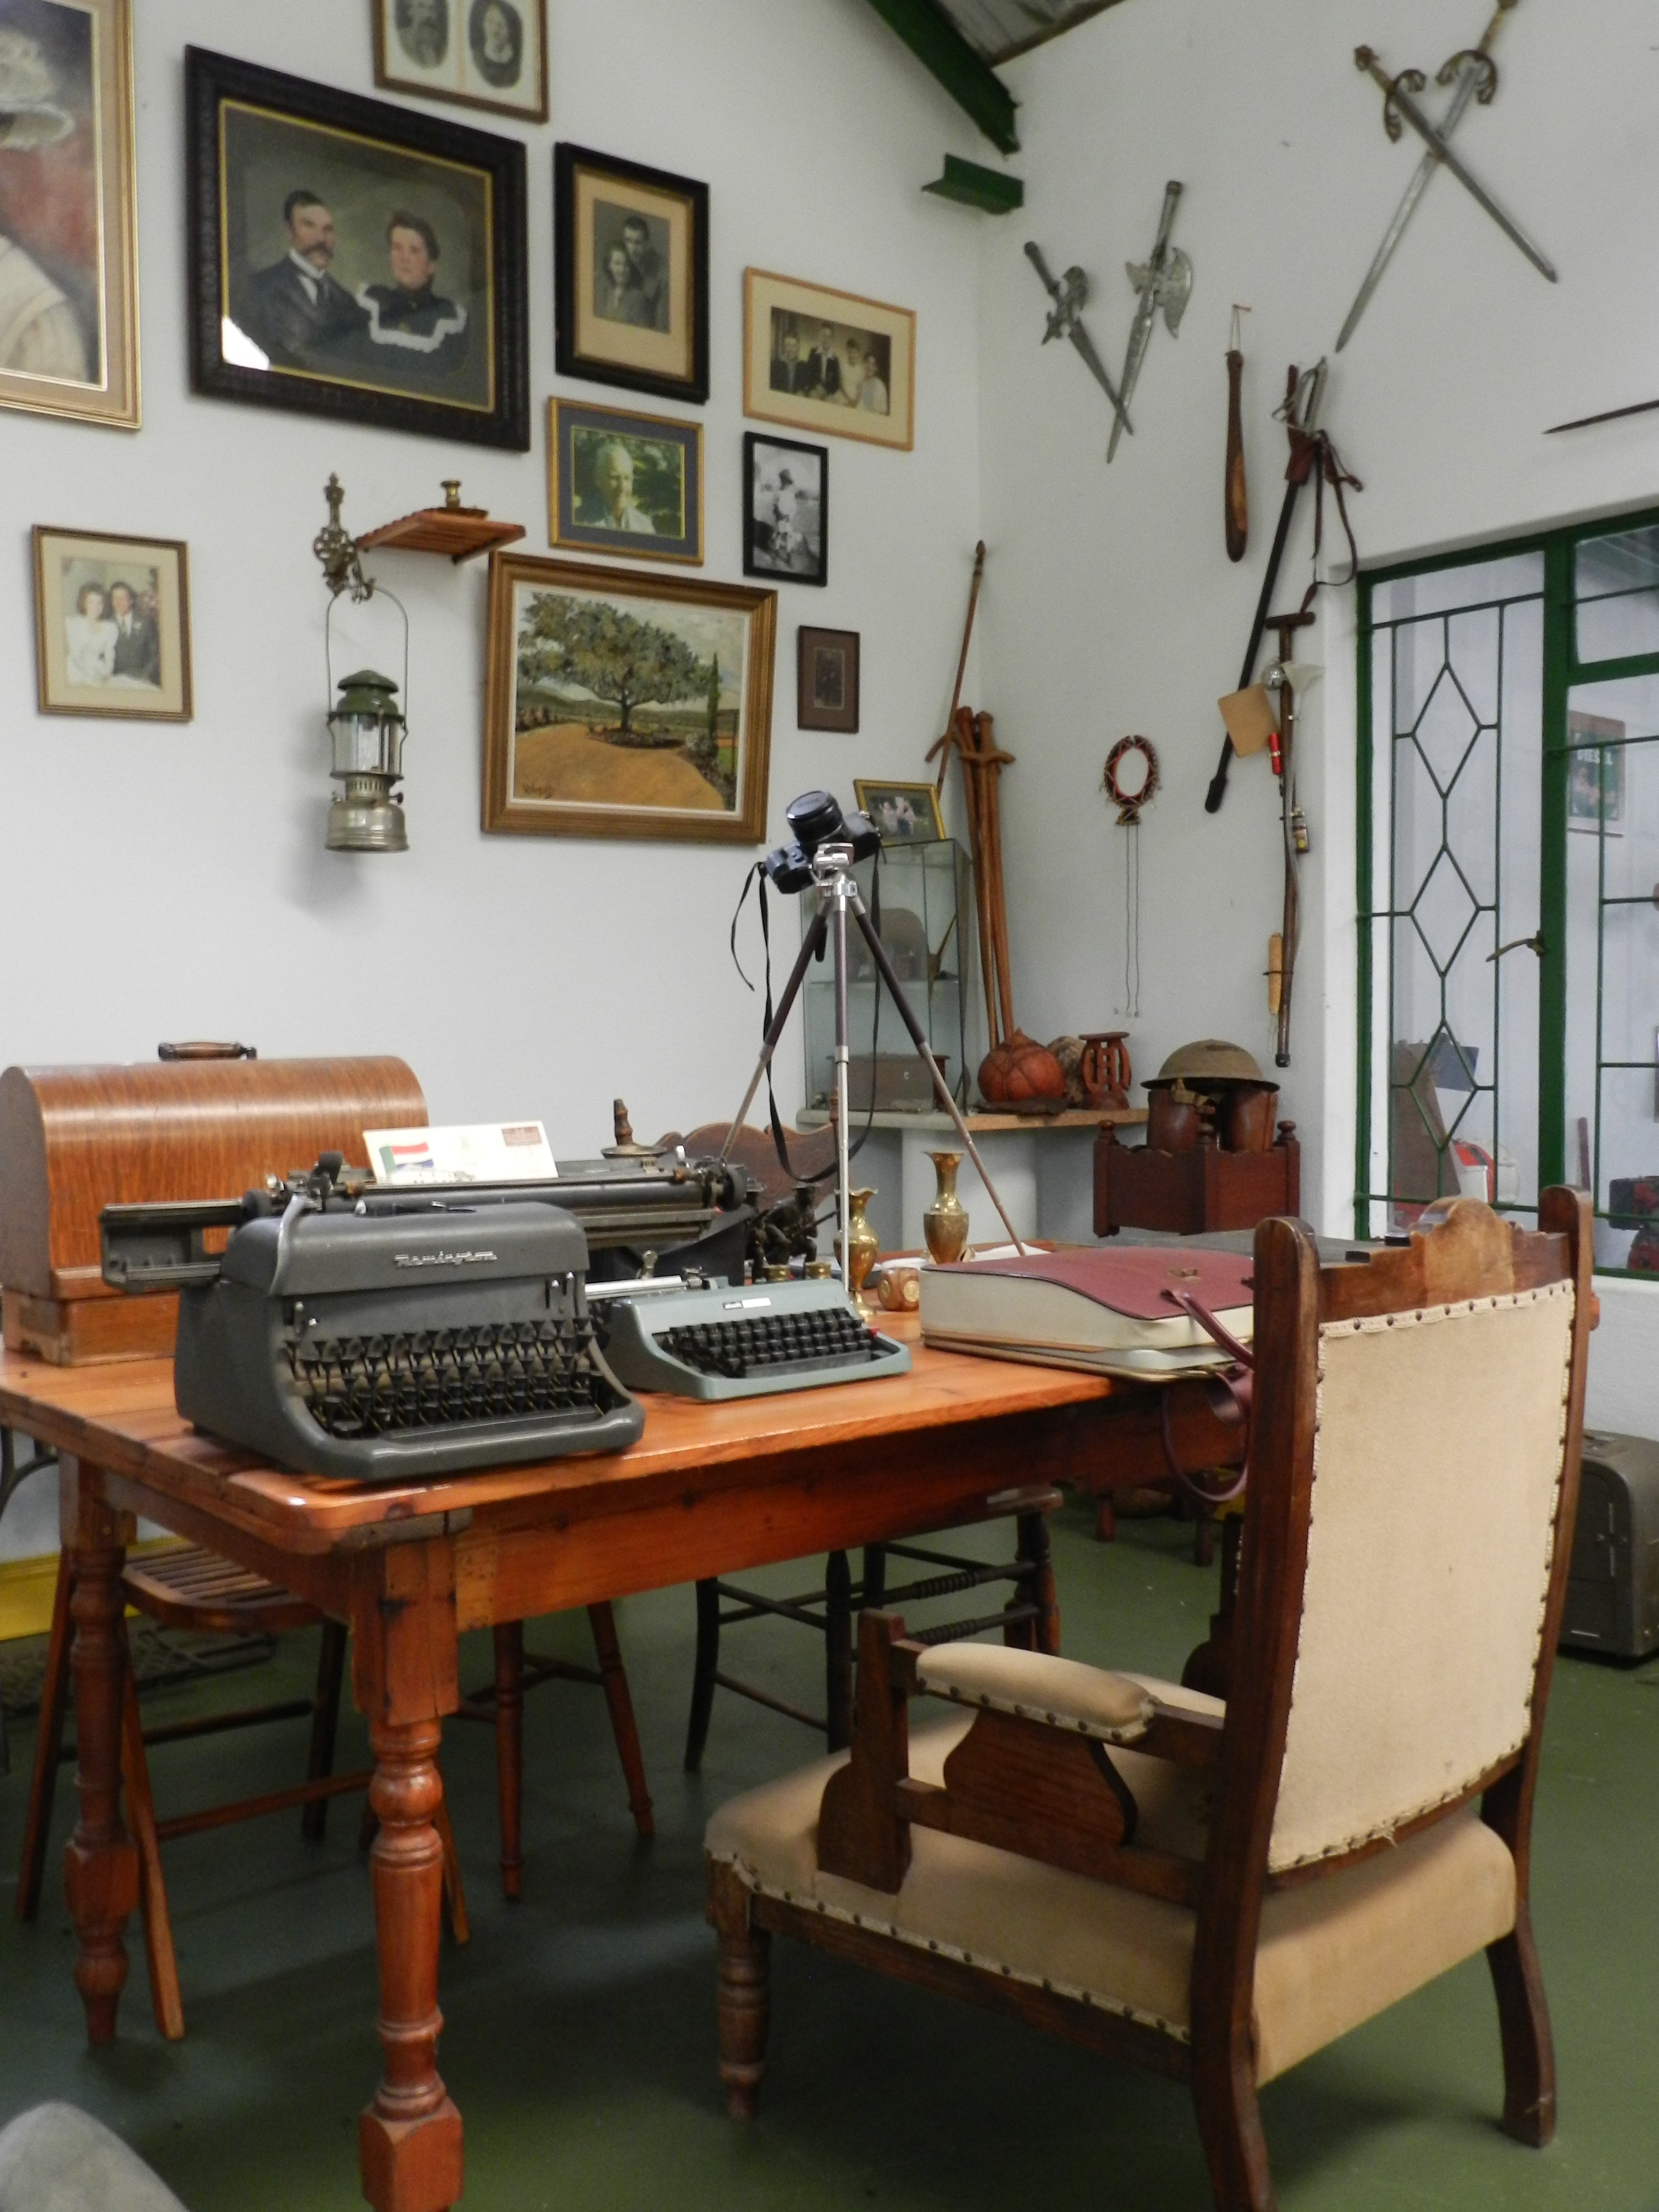 Exhibit of family heirlooms and a Remington typewriter at the Human Jordaan Heritage Collection